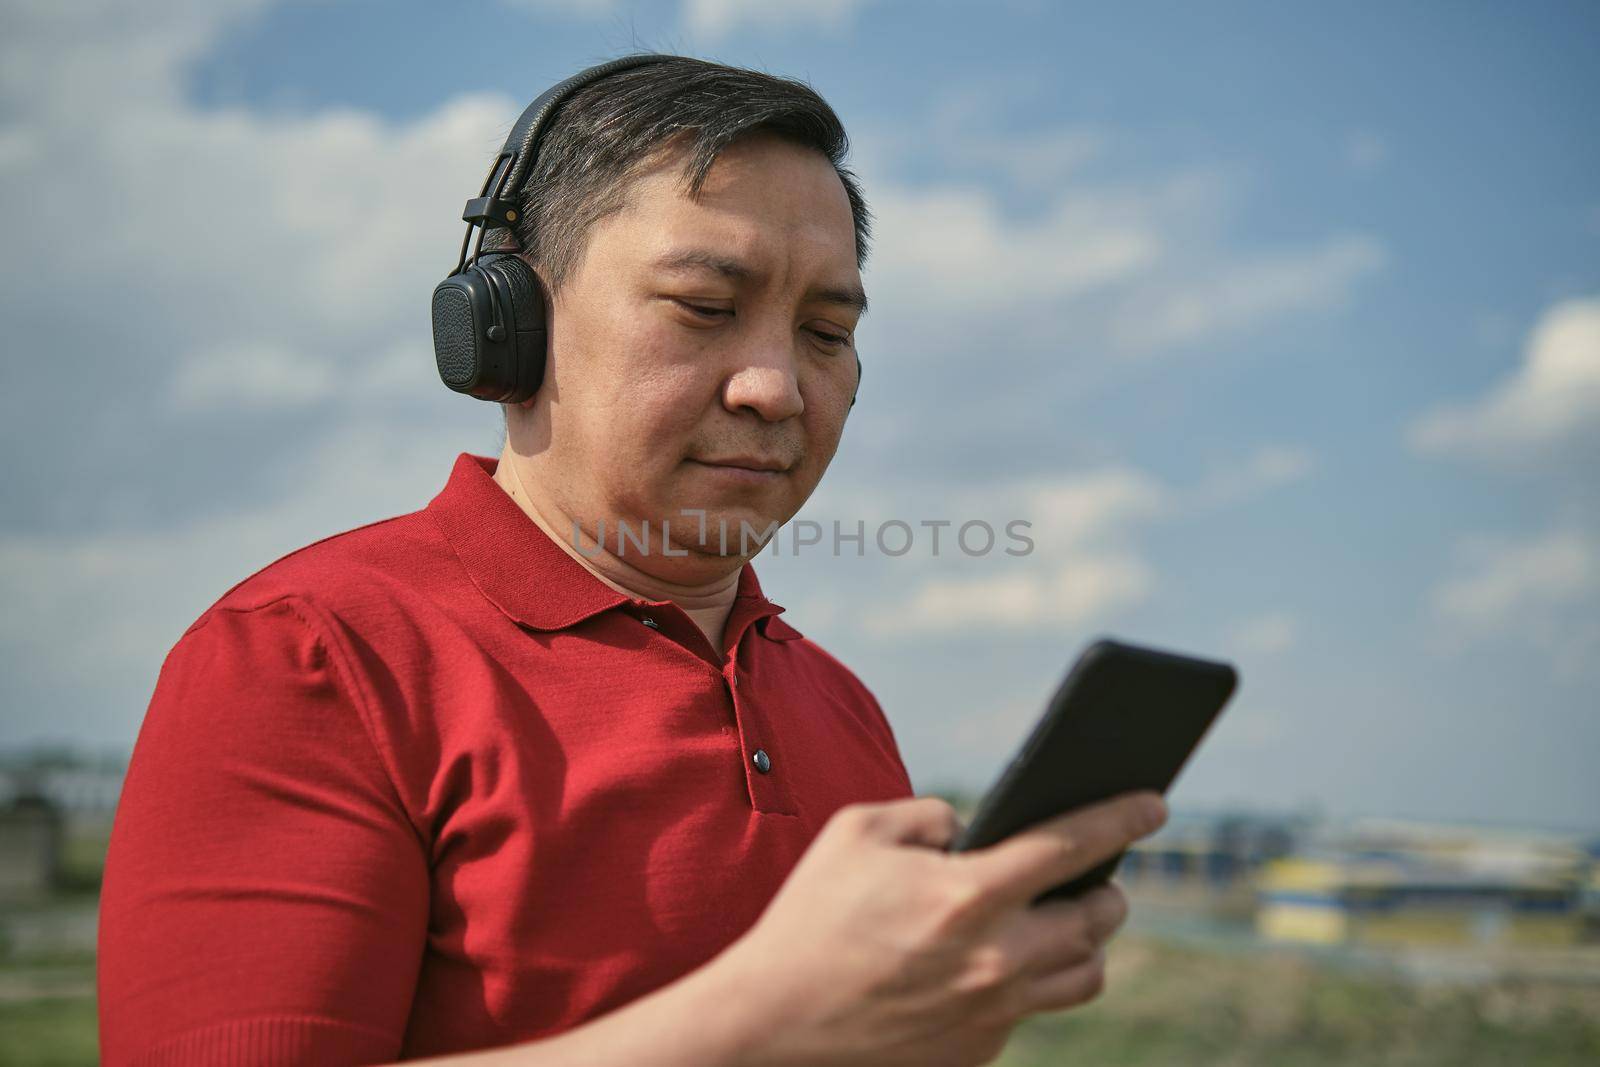 Middle aged man listening to music by his phone, close up by snep_photo